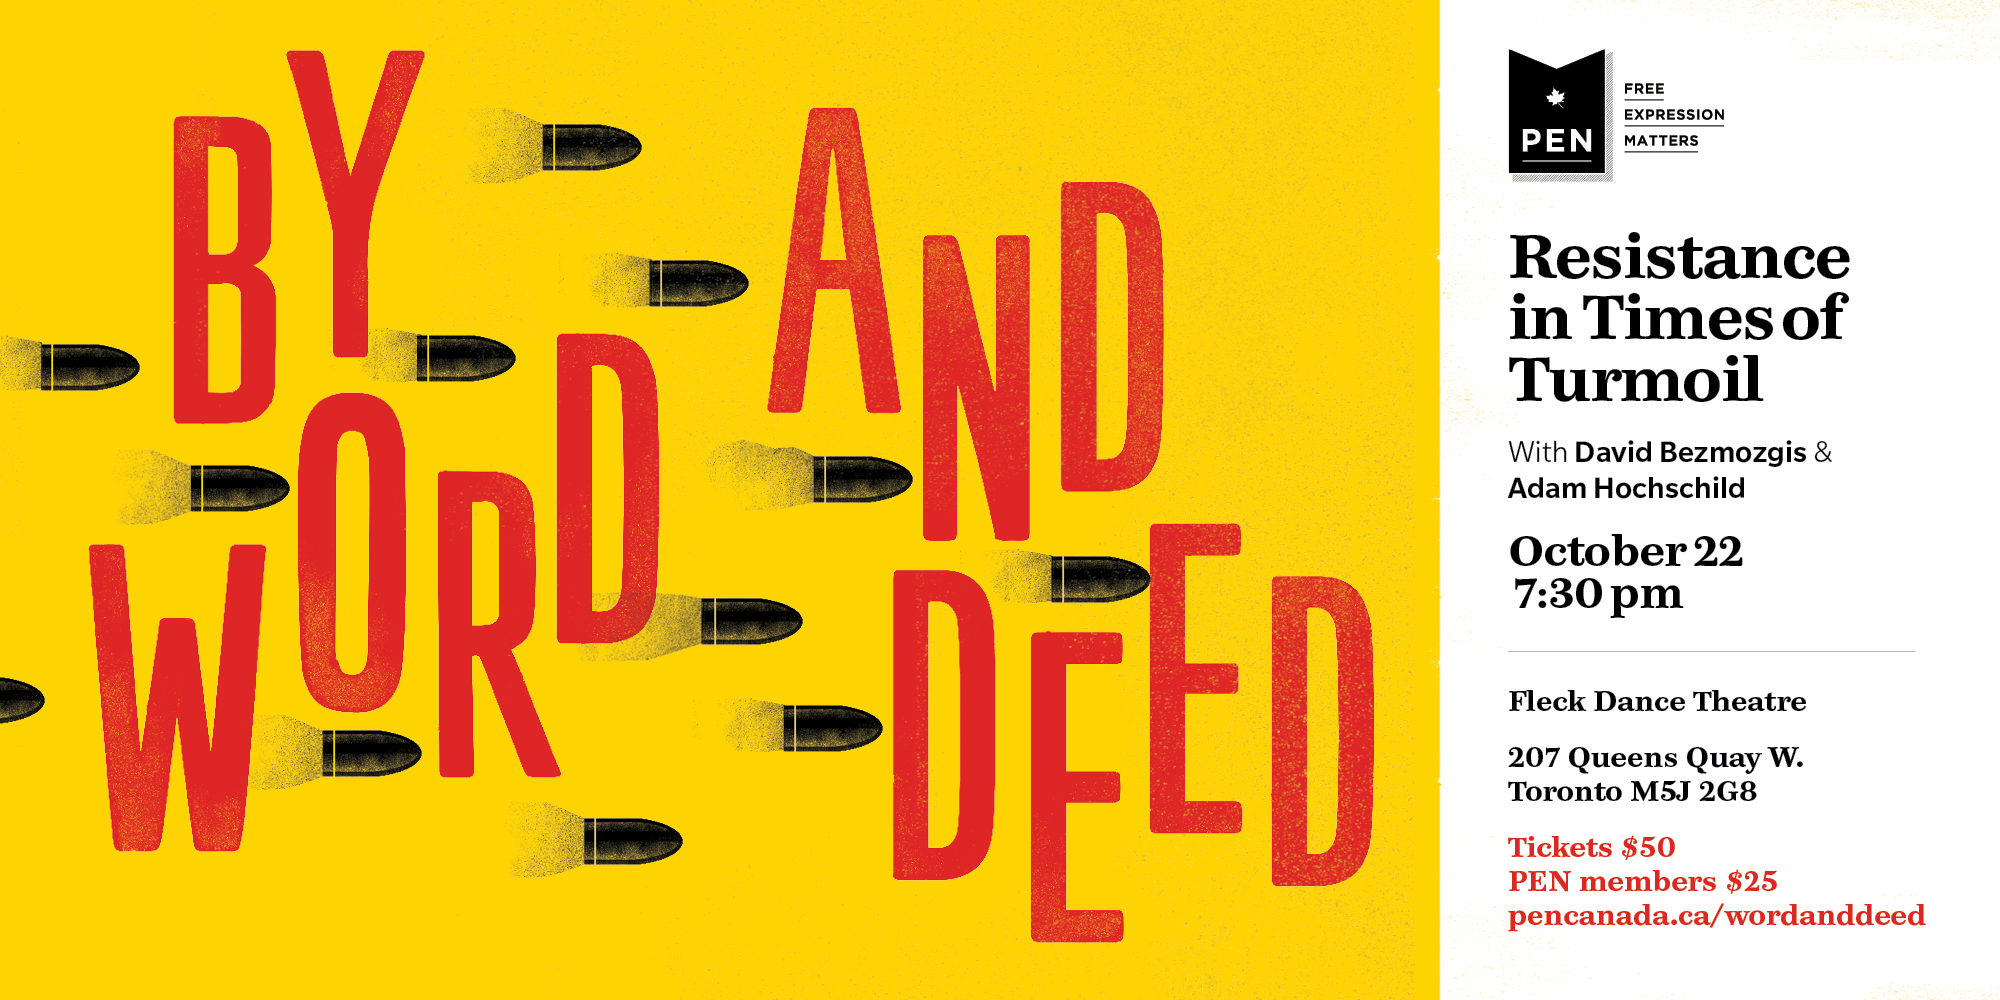 By Word and Deed: Resistance in Times of Turmoil